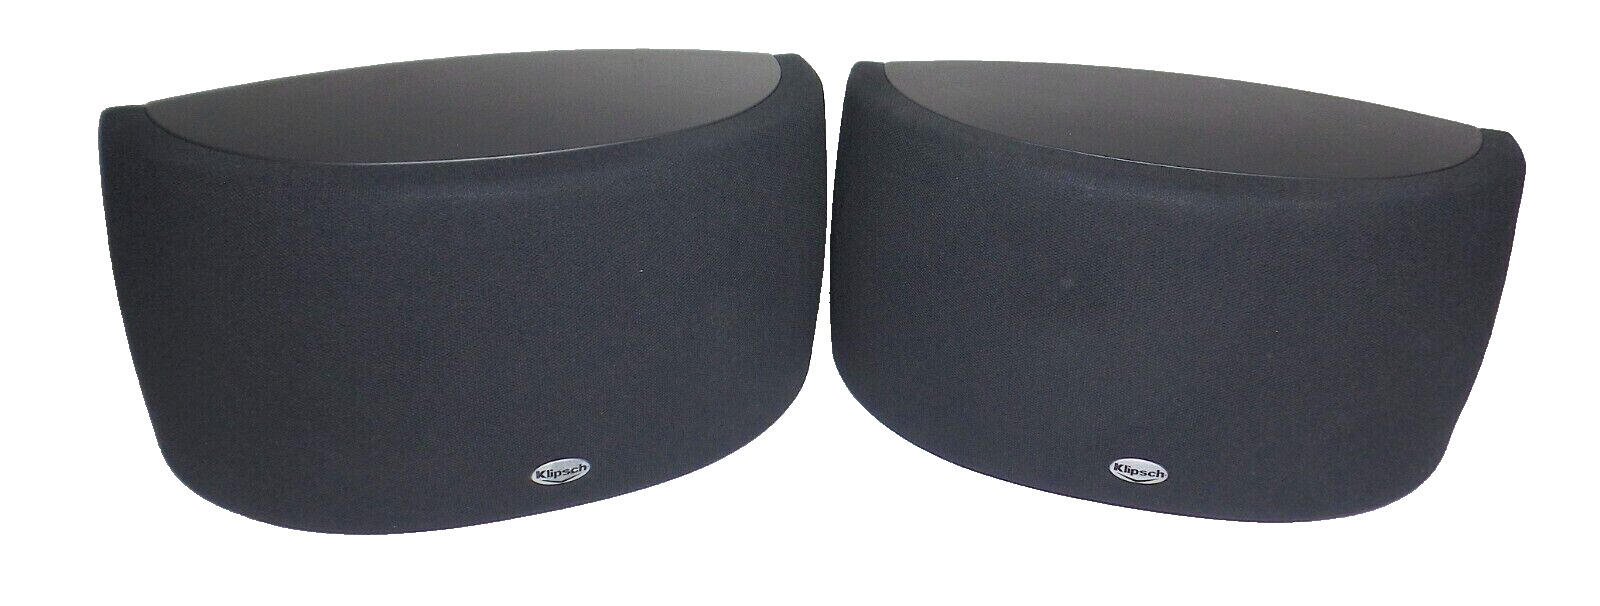 Klipsch Synergy S1 Surround Speakers (Pair) 50w 8 Ohm w/Wall Mounts - TESTED EUC